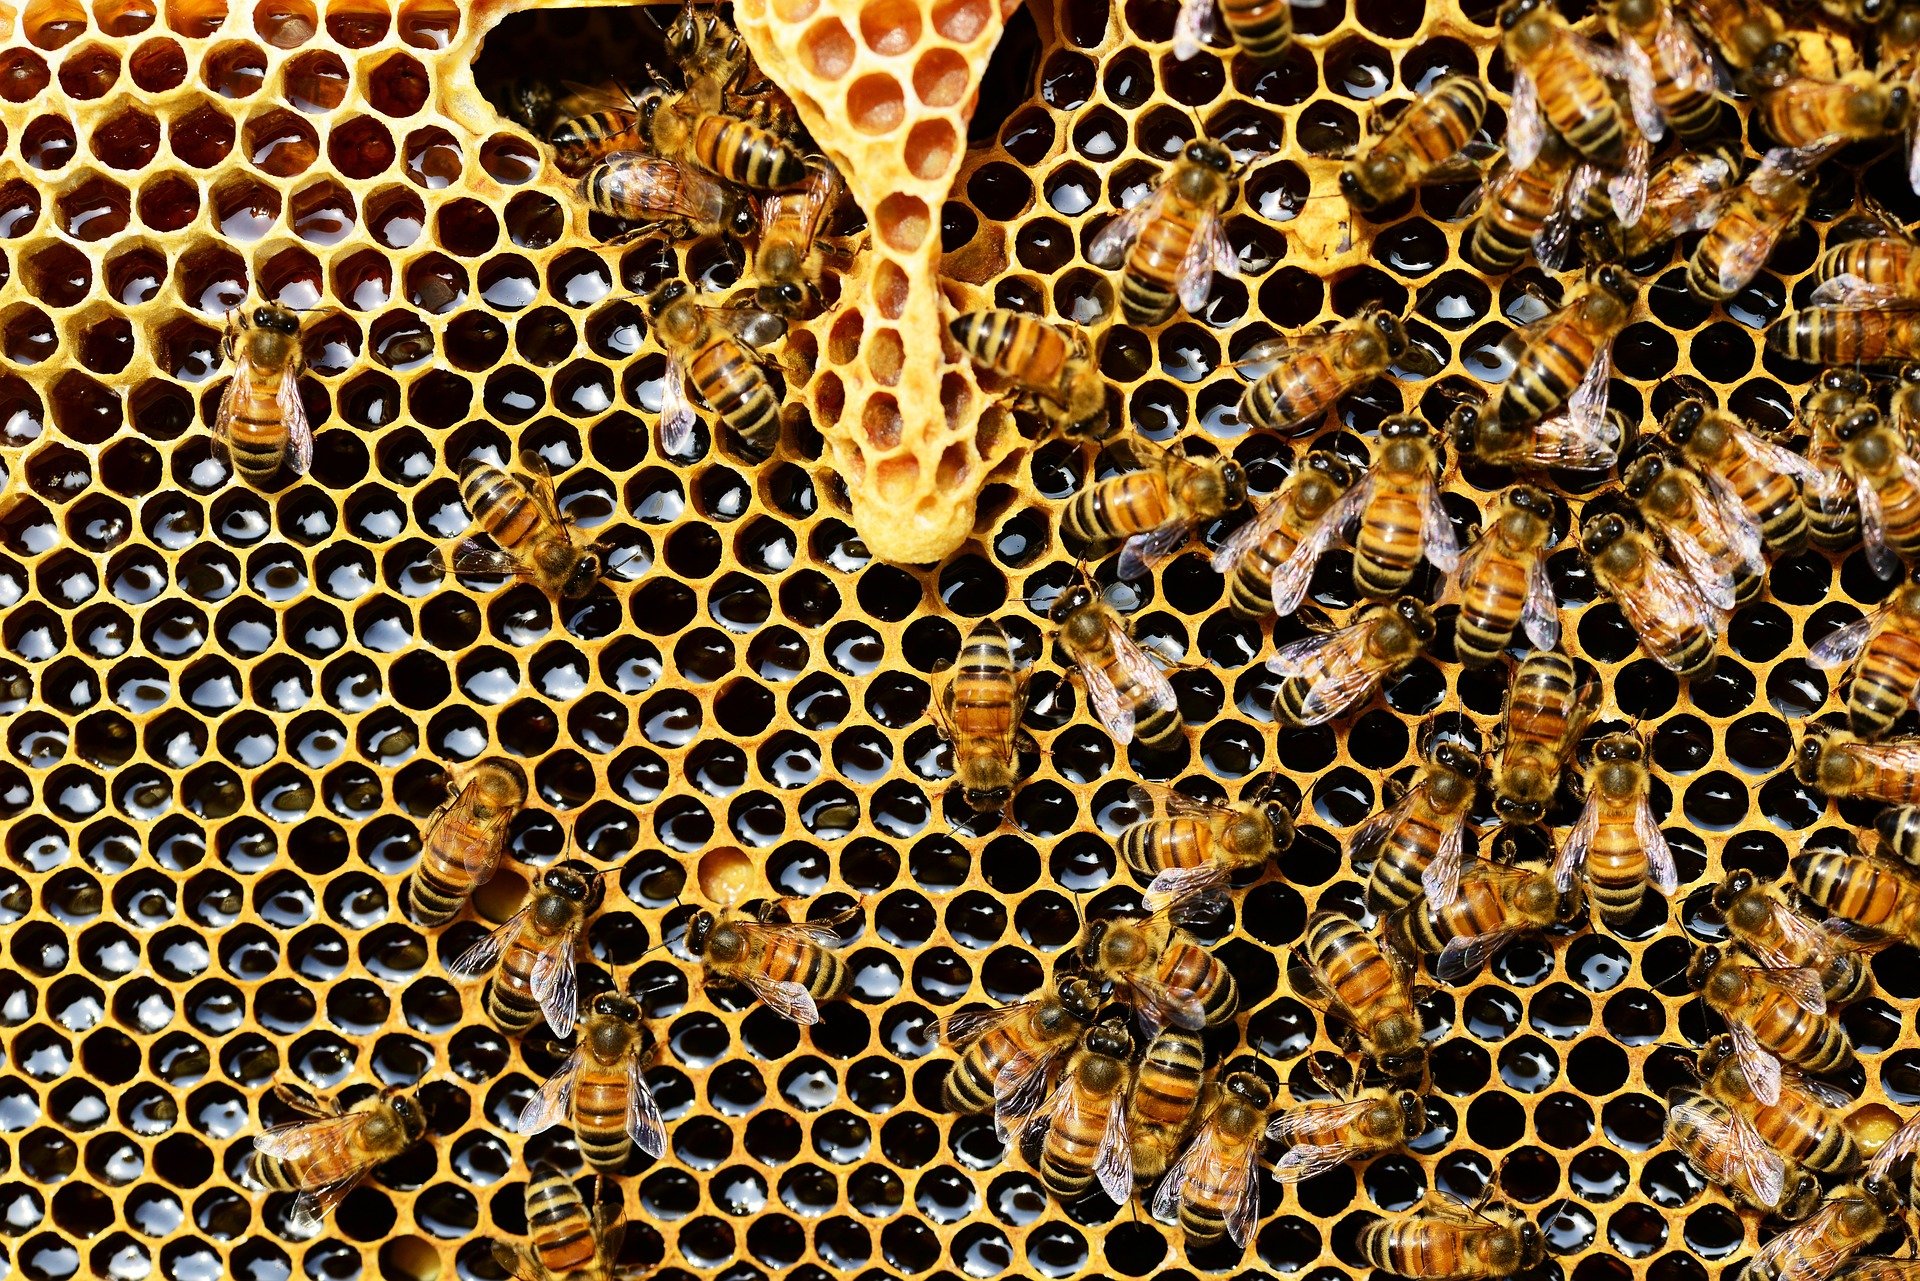 Where did western honey bees come from? New research finds the sweet spot